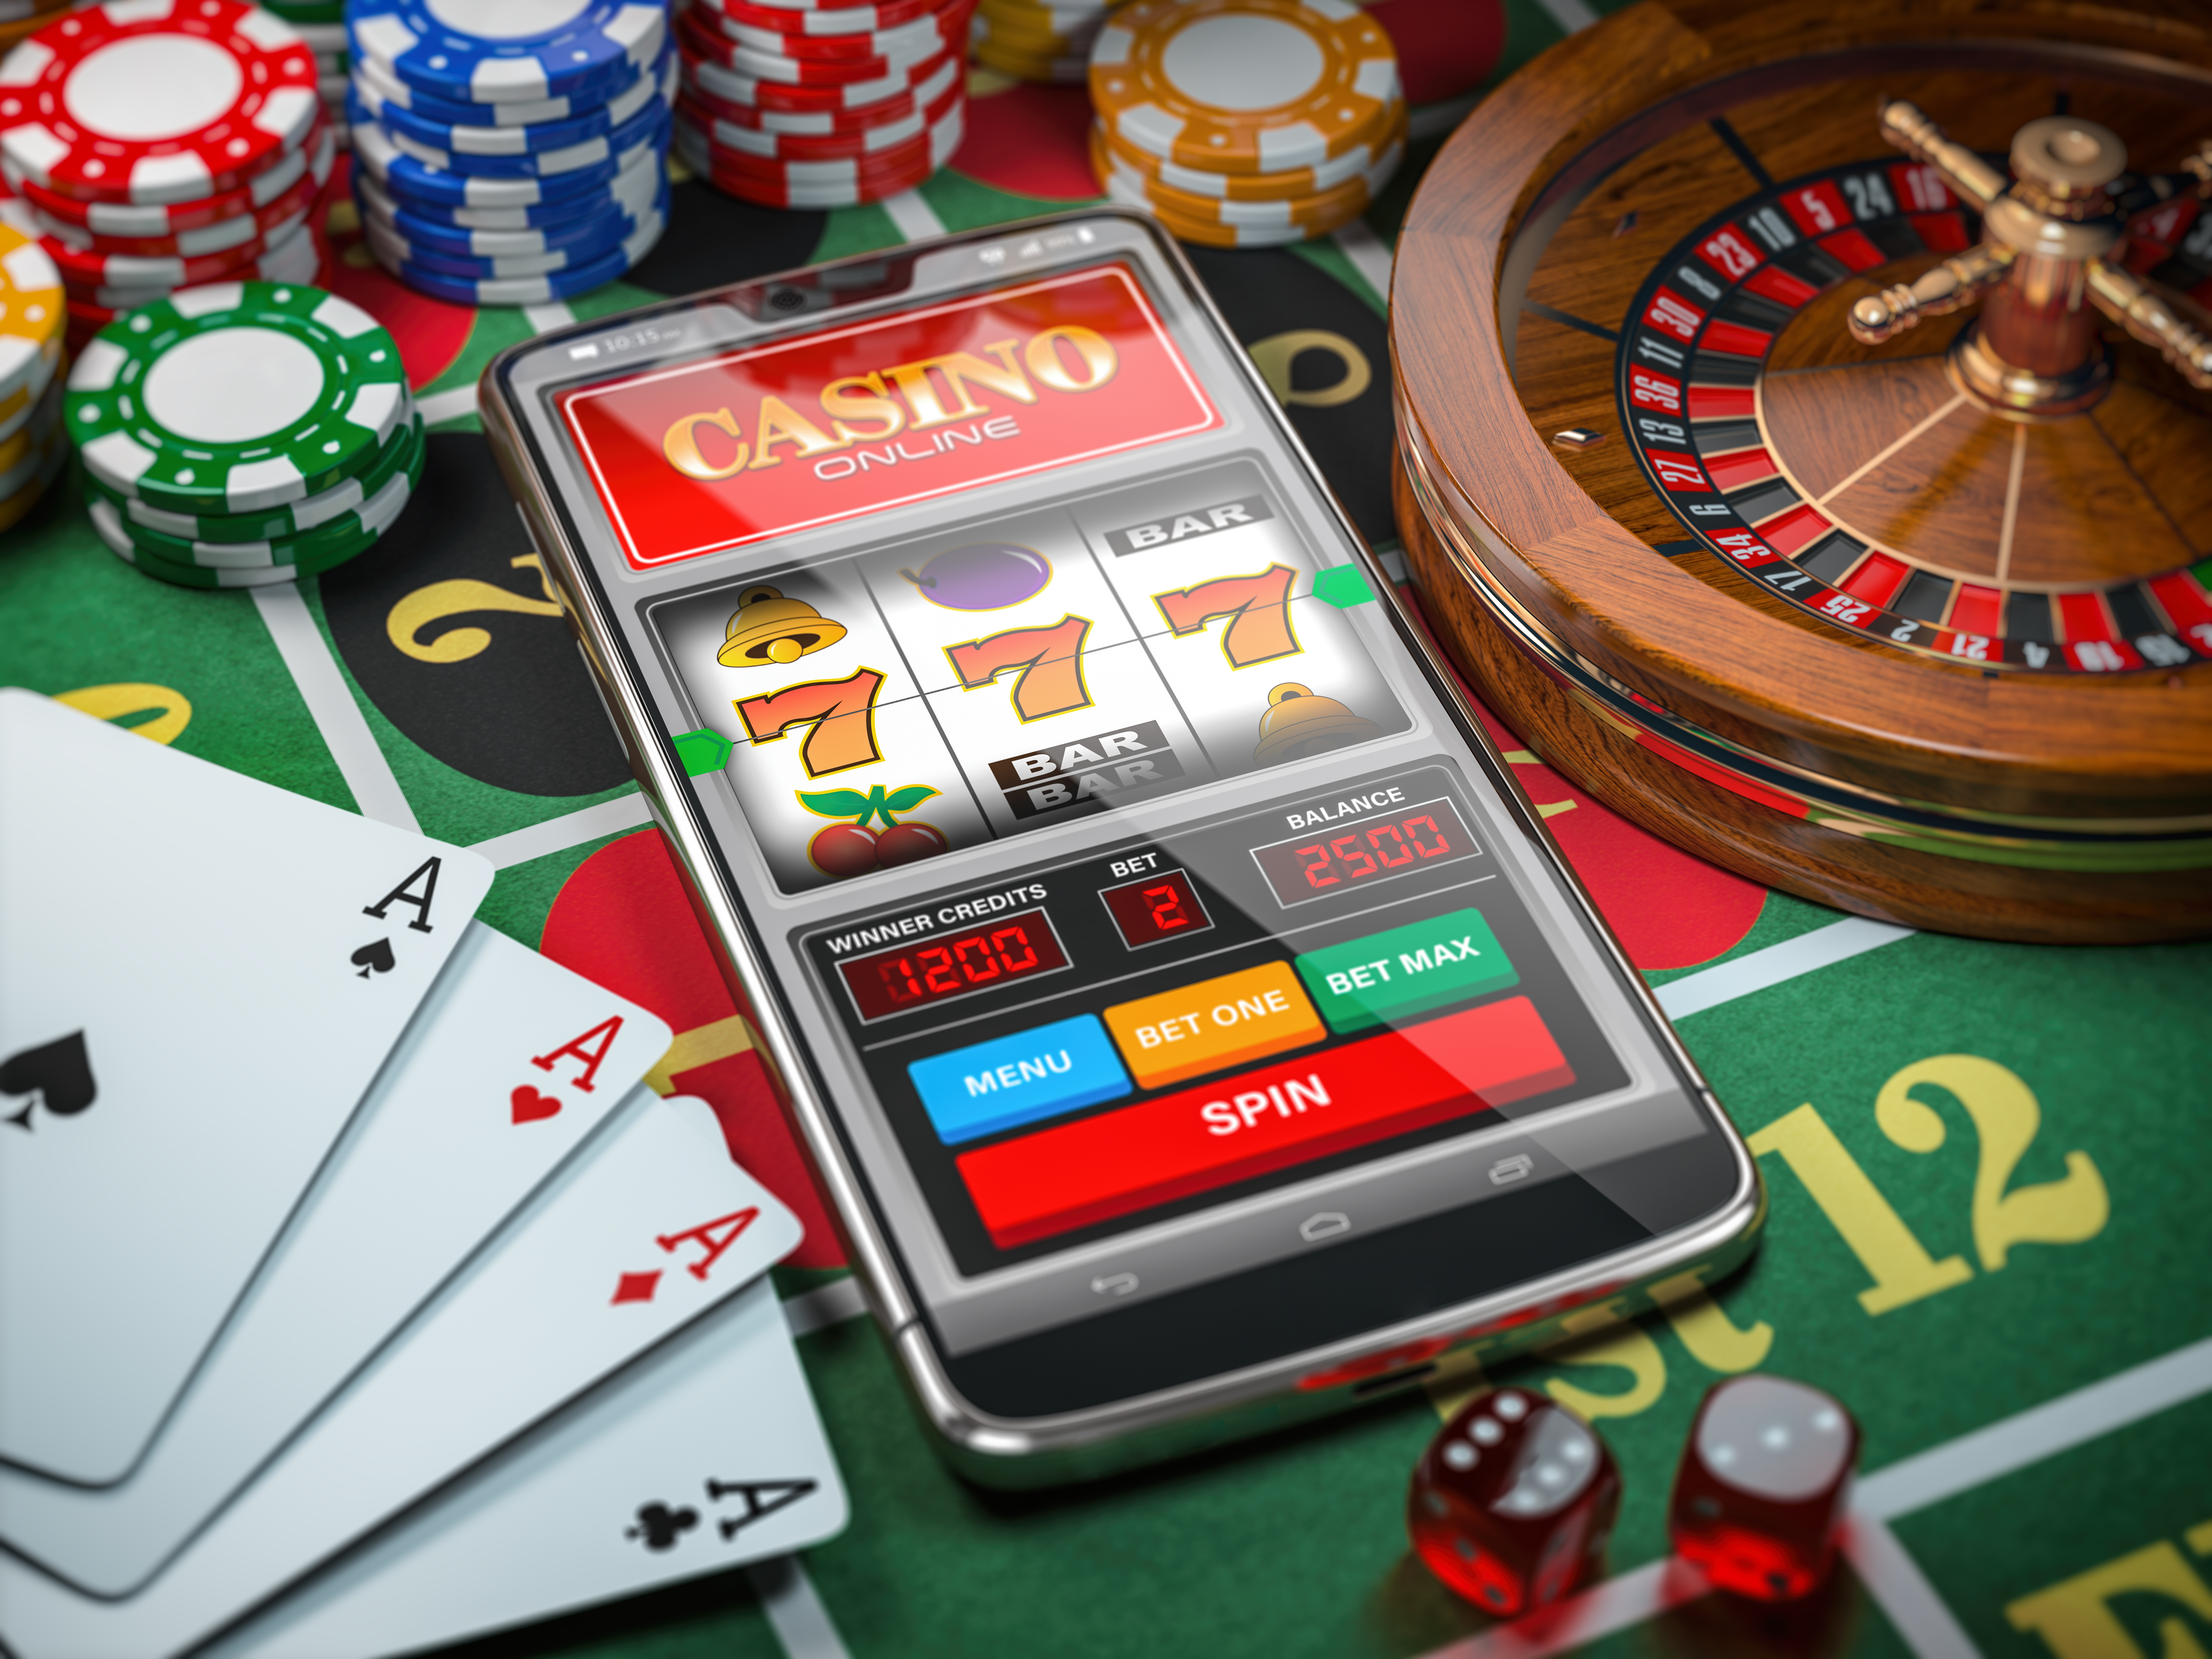 3 Ways Create Better Krikya: Your Gateway to Online Casino Fun - Discover the Krikya Casino Today! With The Help Of Your Dog